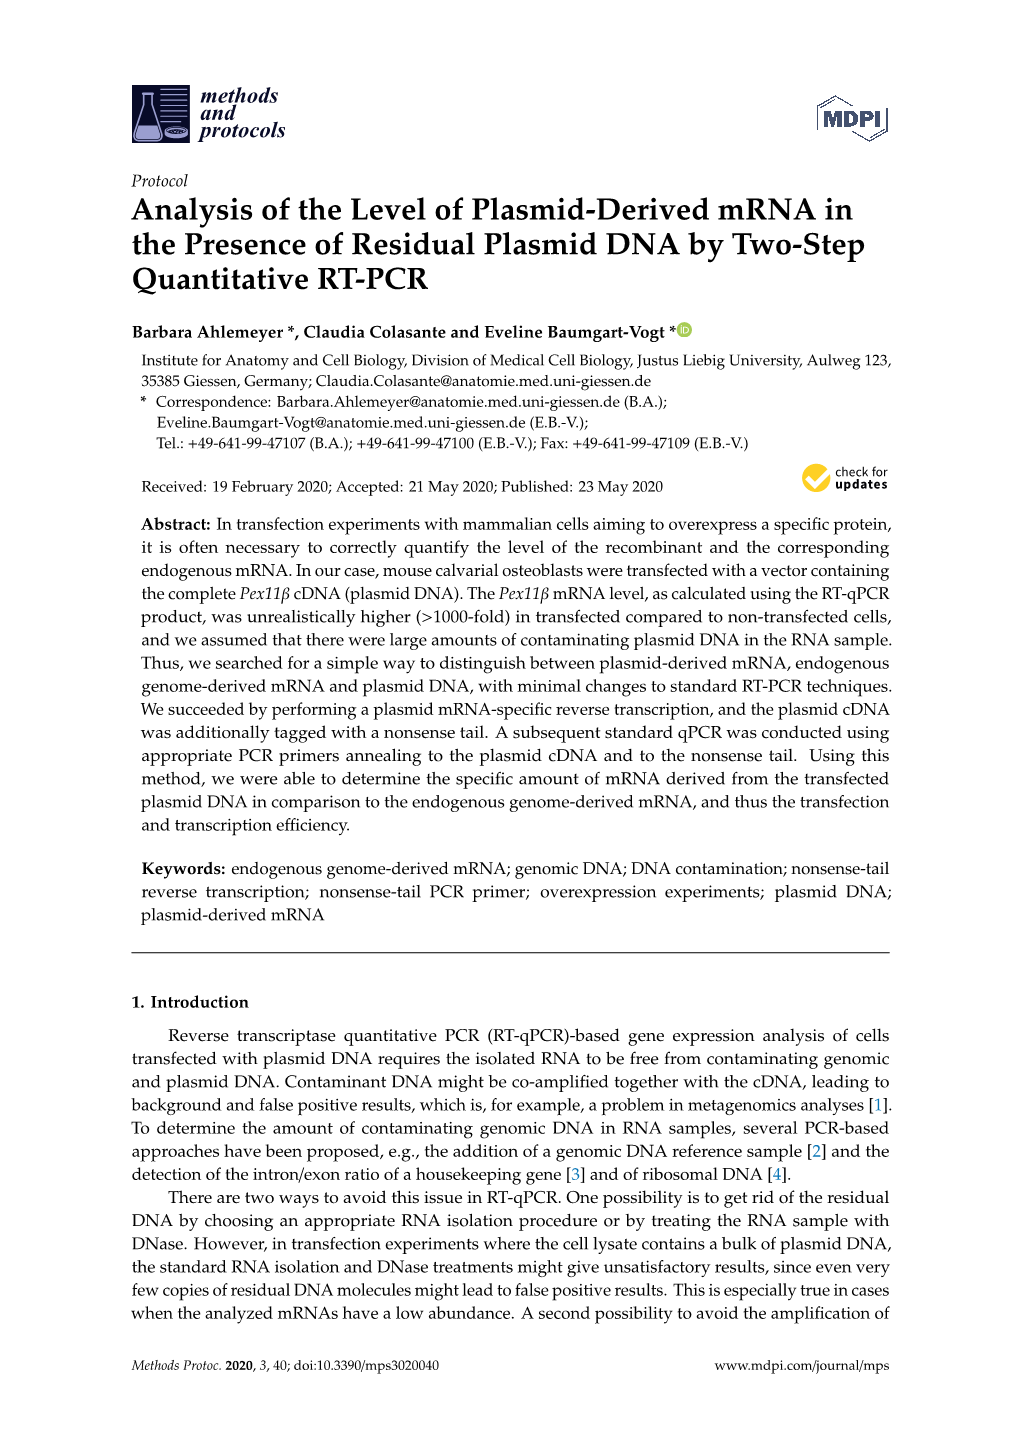 Analysis of the Level of Plasmid-Derived Mrna in the Presence of Residual Plasmid DNA by Two-Step Quantitative RT-PCR